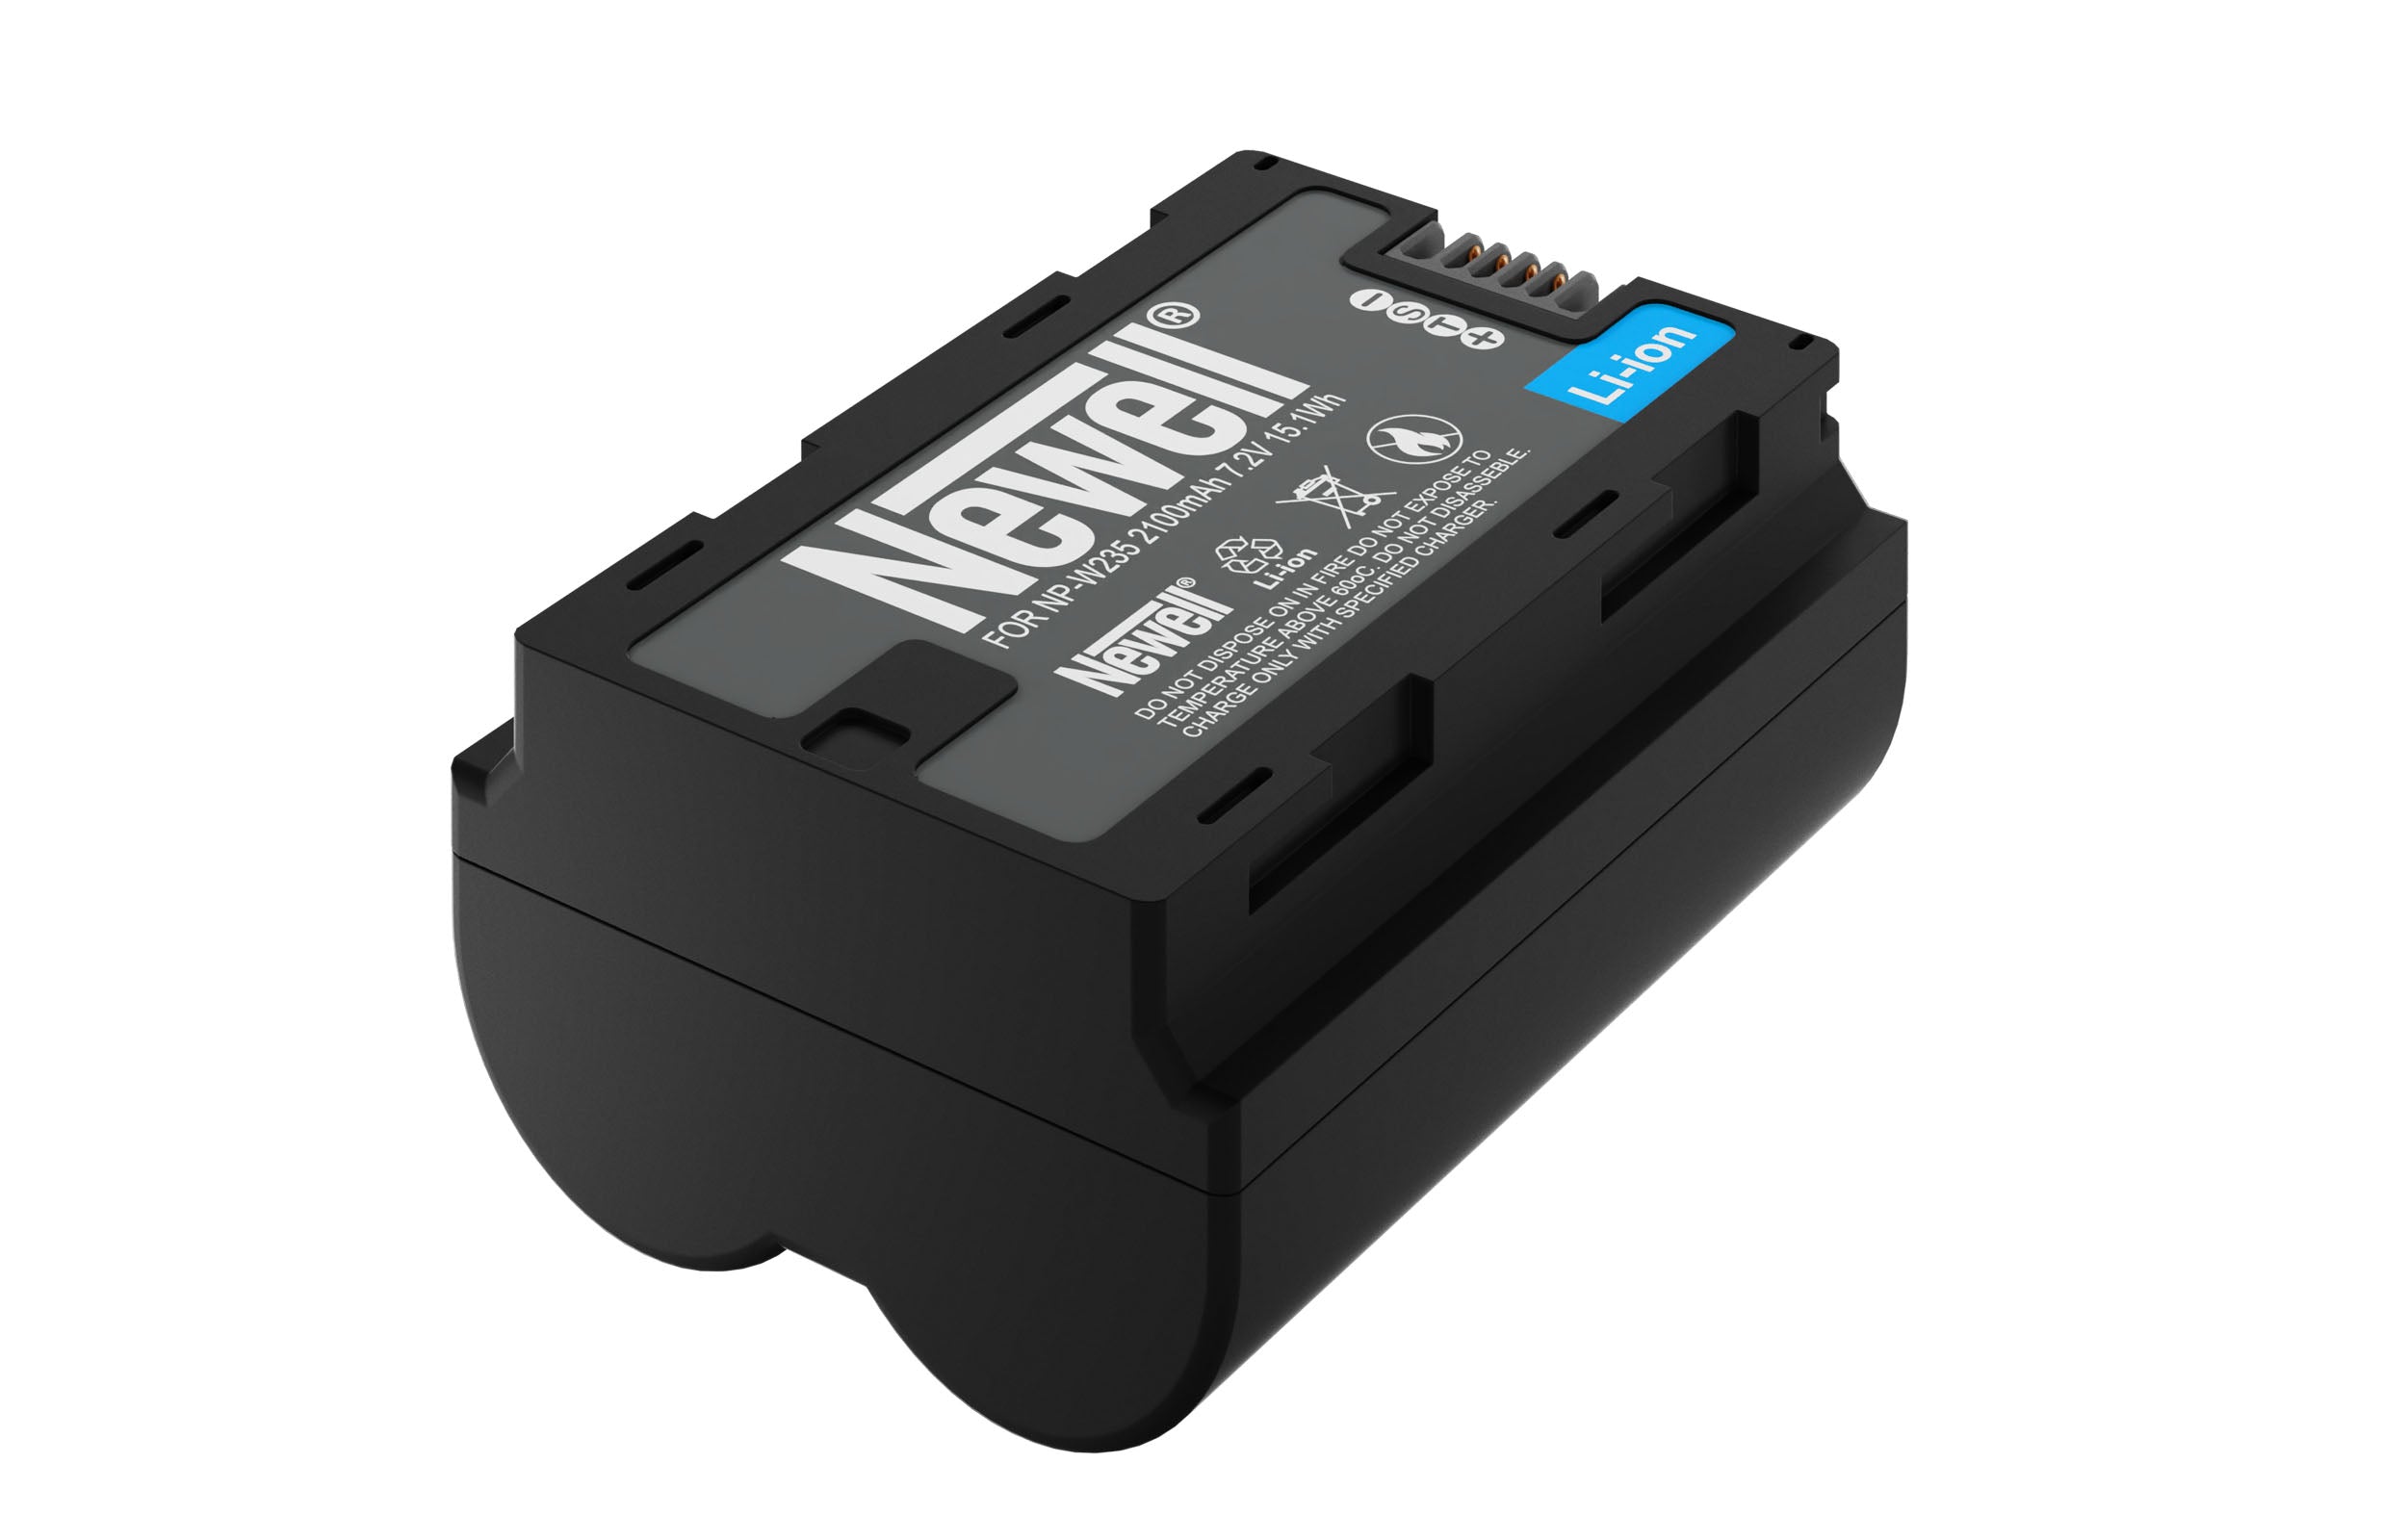 Newell rechargeable battery NP-W235